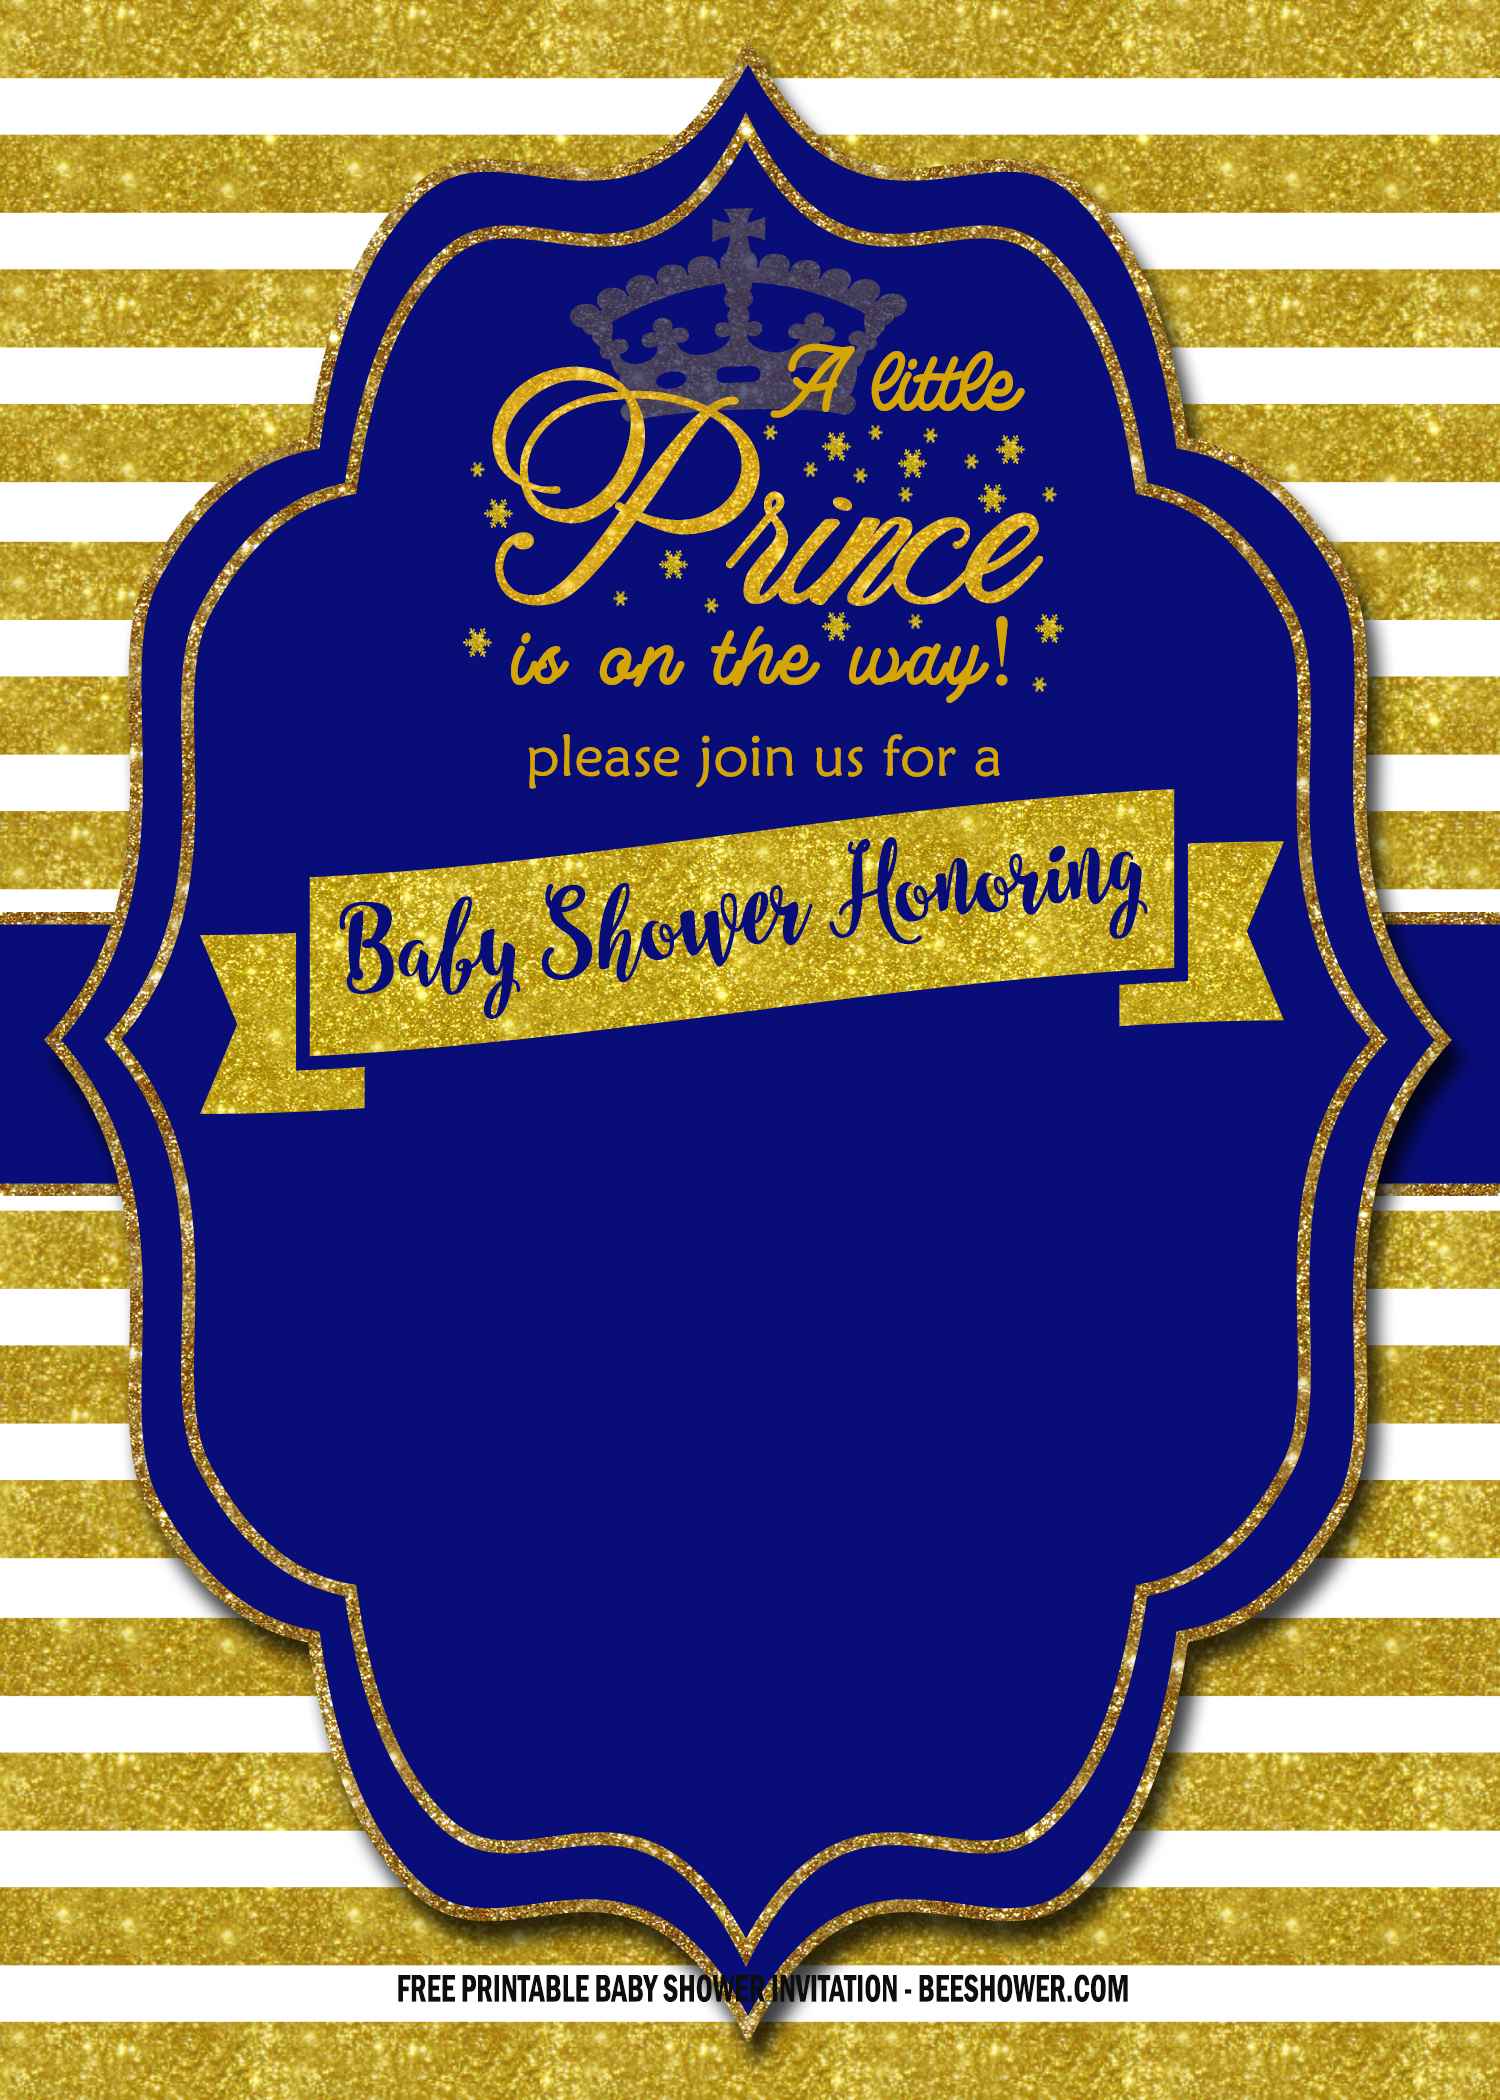 FREE Blue and Gold Royal Party Invitations FREE Printable Birthday